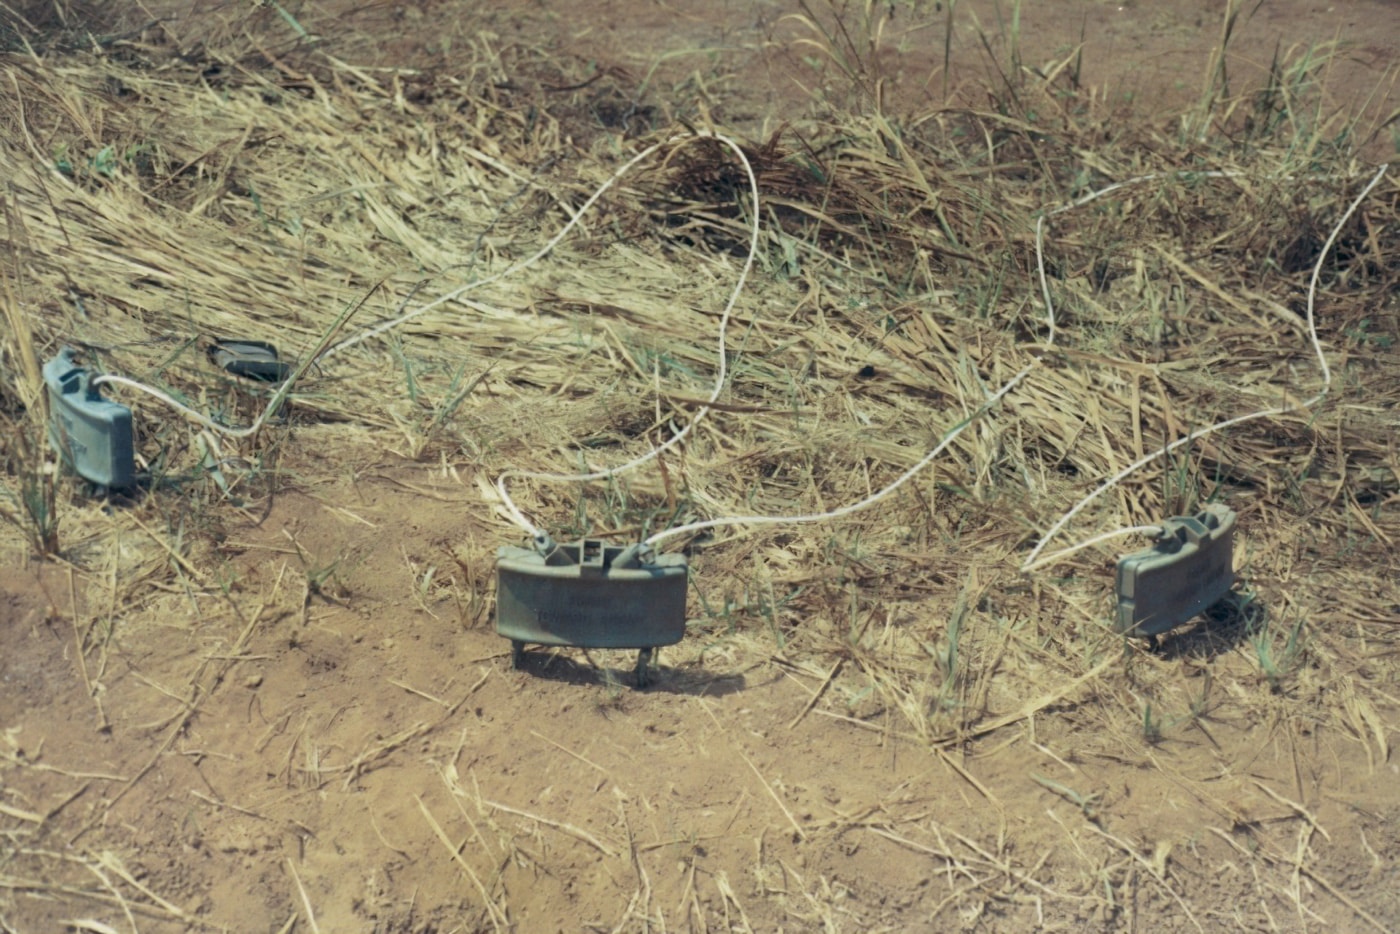 claymore mines daisy chained on defensive perimeter in vietnam